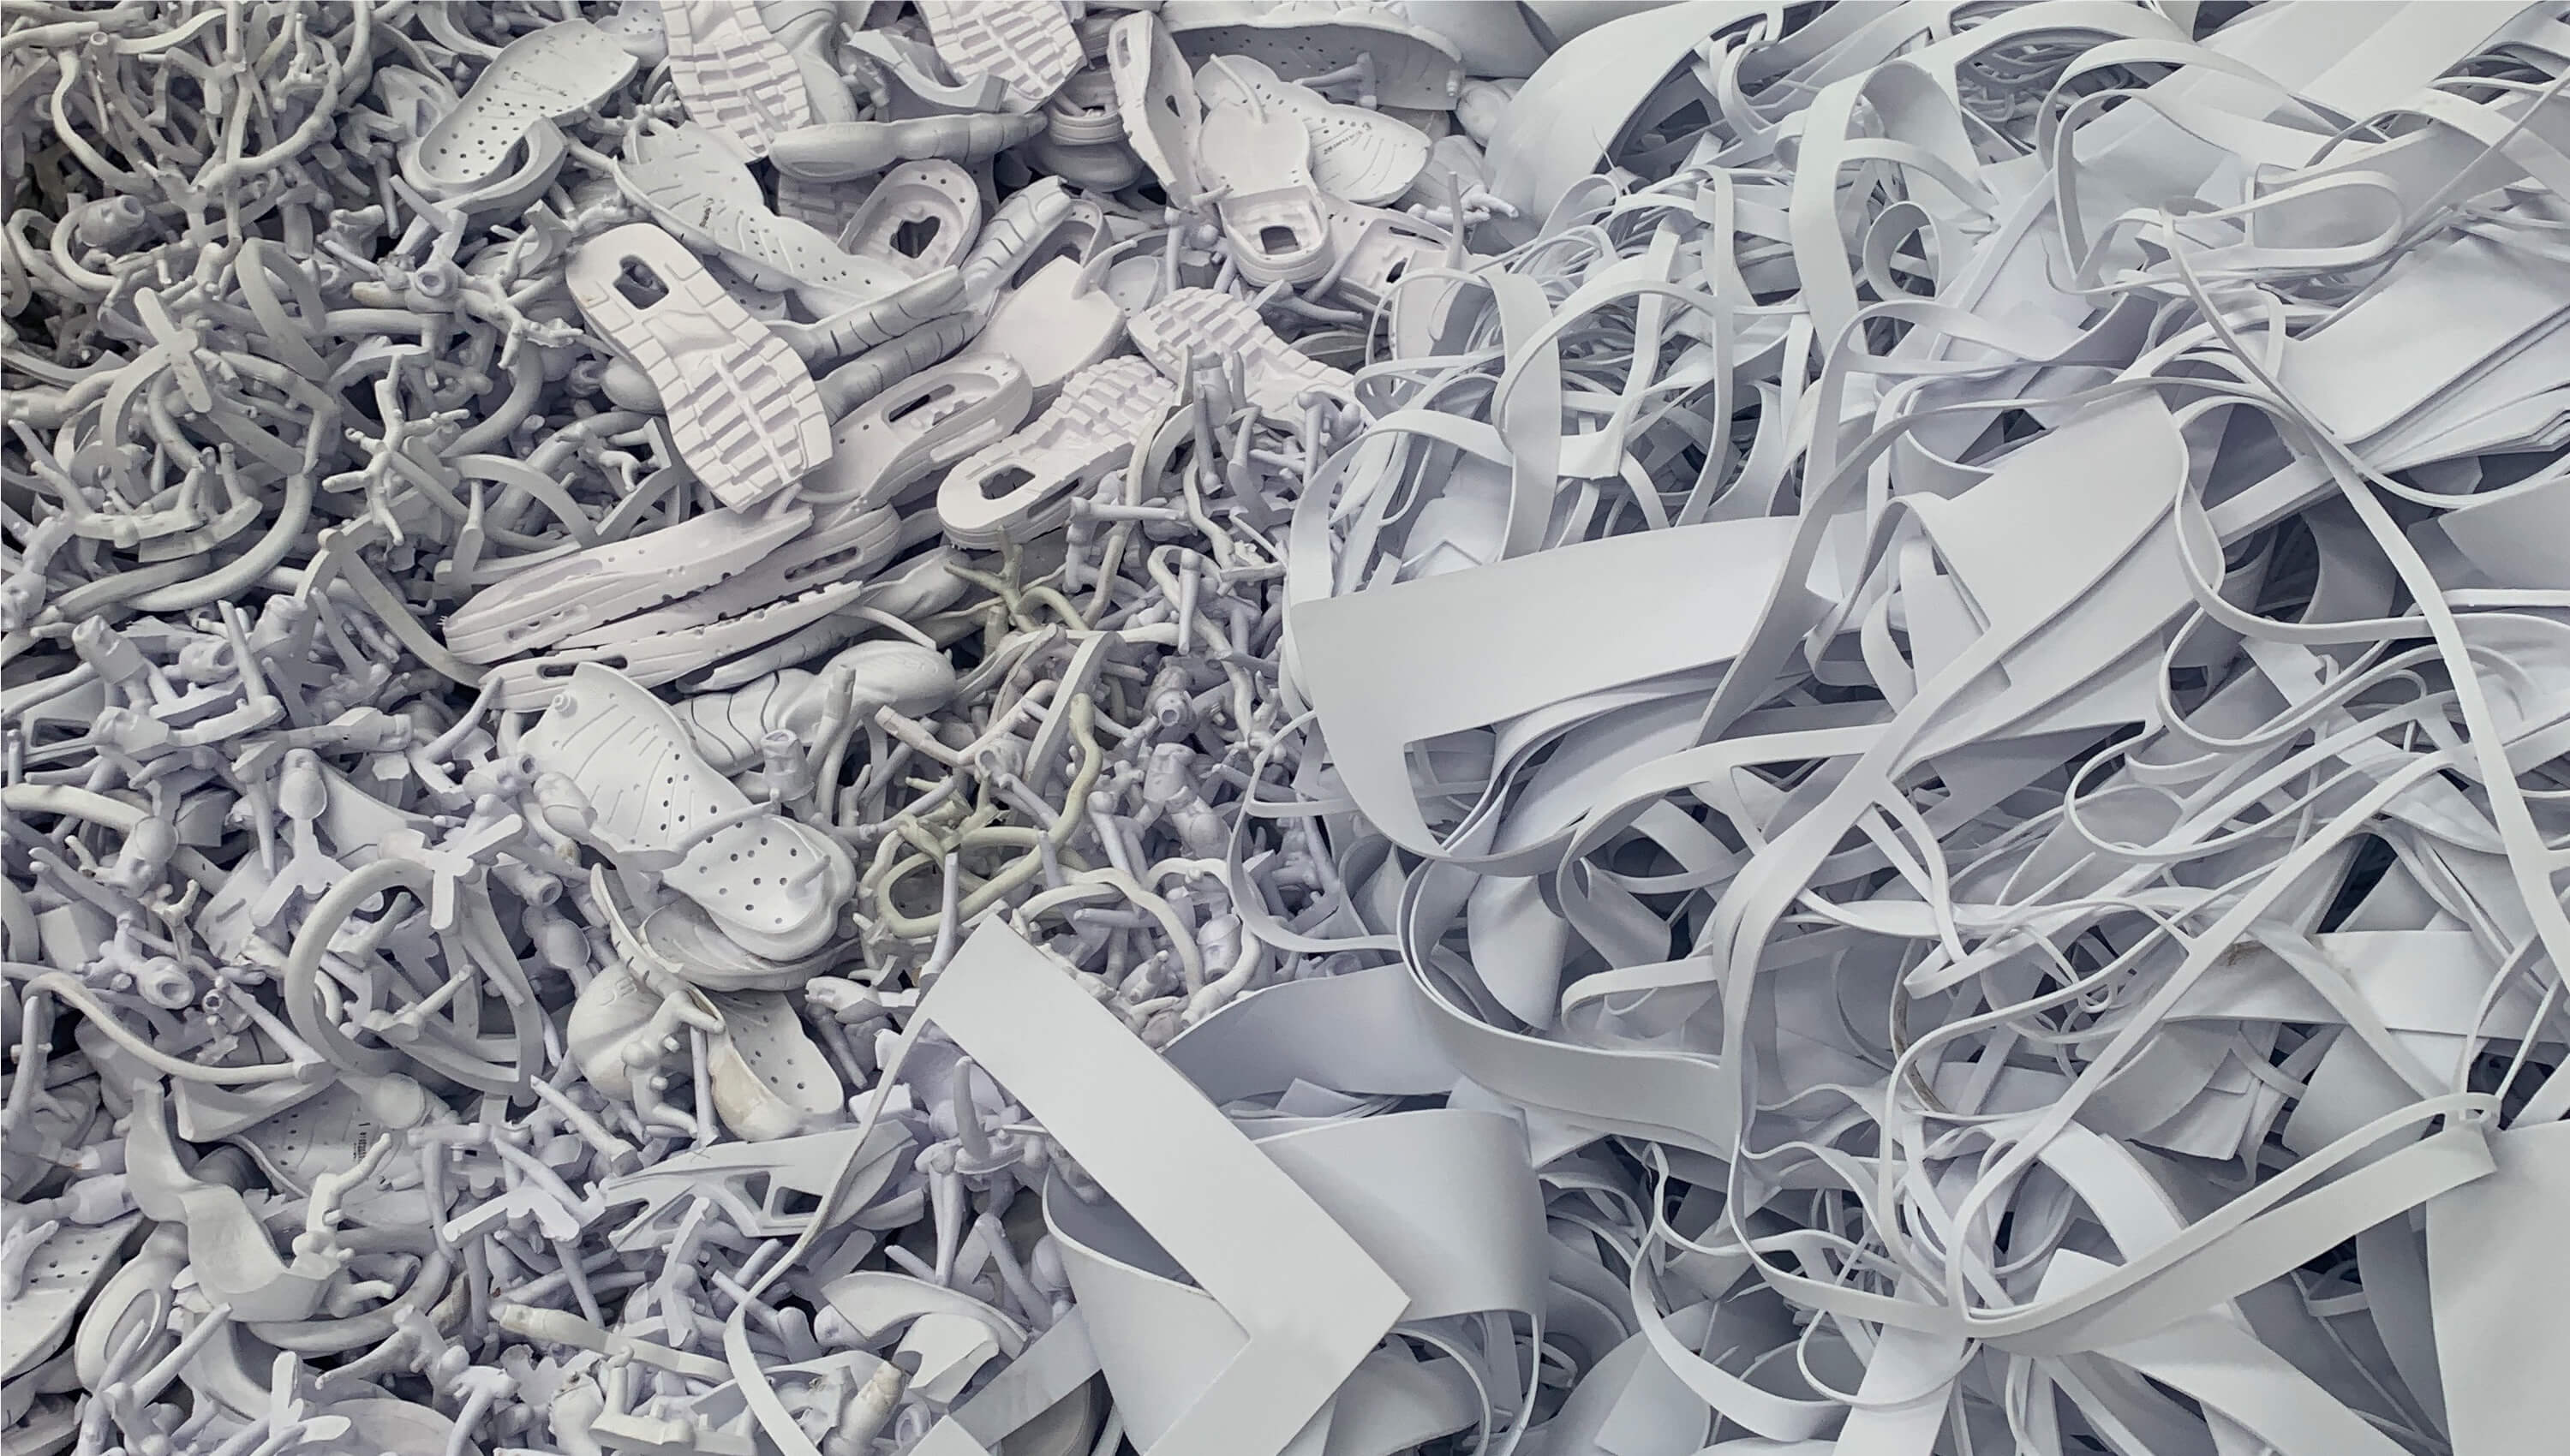 A pile of colorless materials that can be recycled into Nike Grind